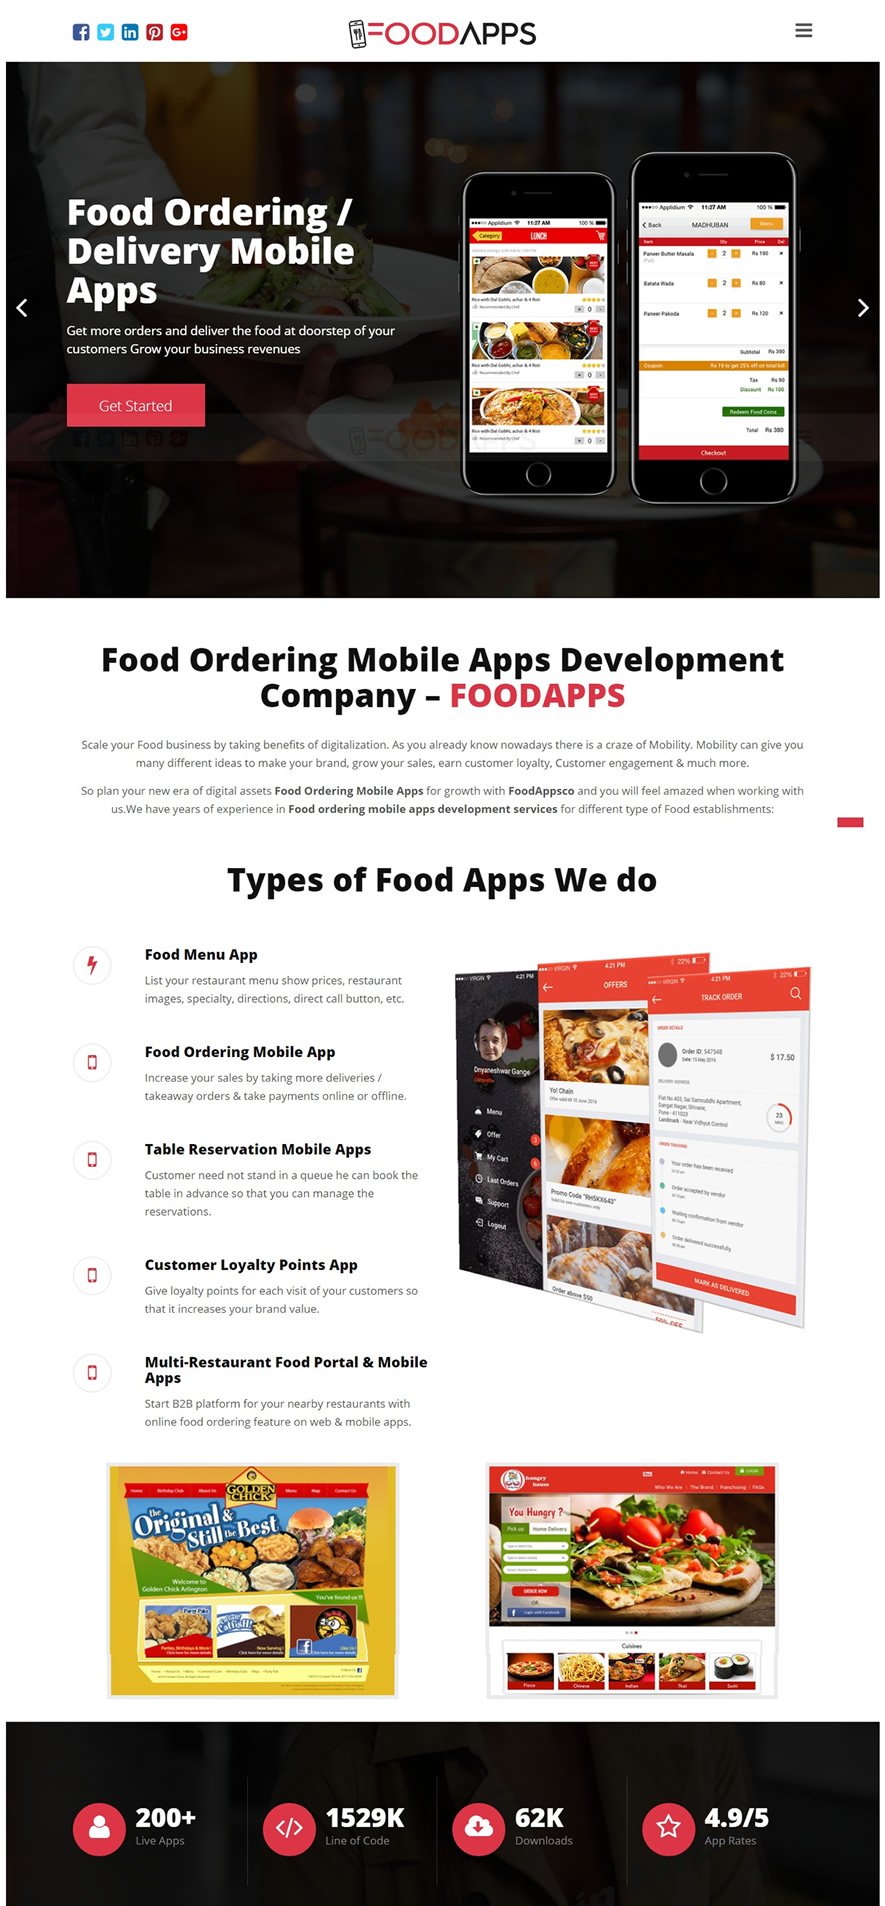 News - Announcing the launch of our new niche division - FoodAppsco.com